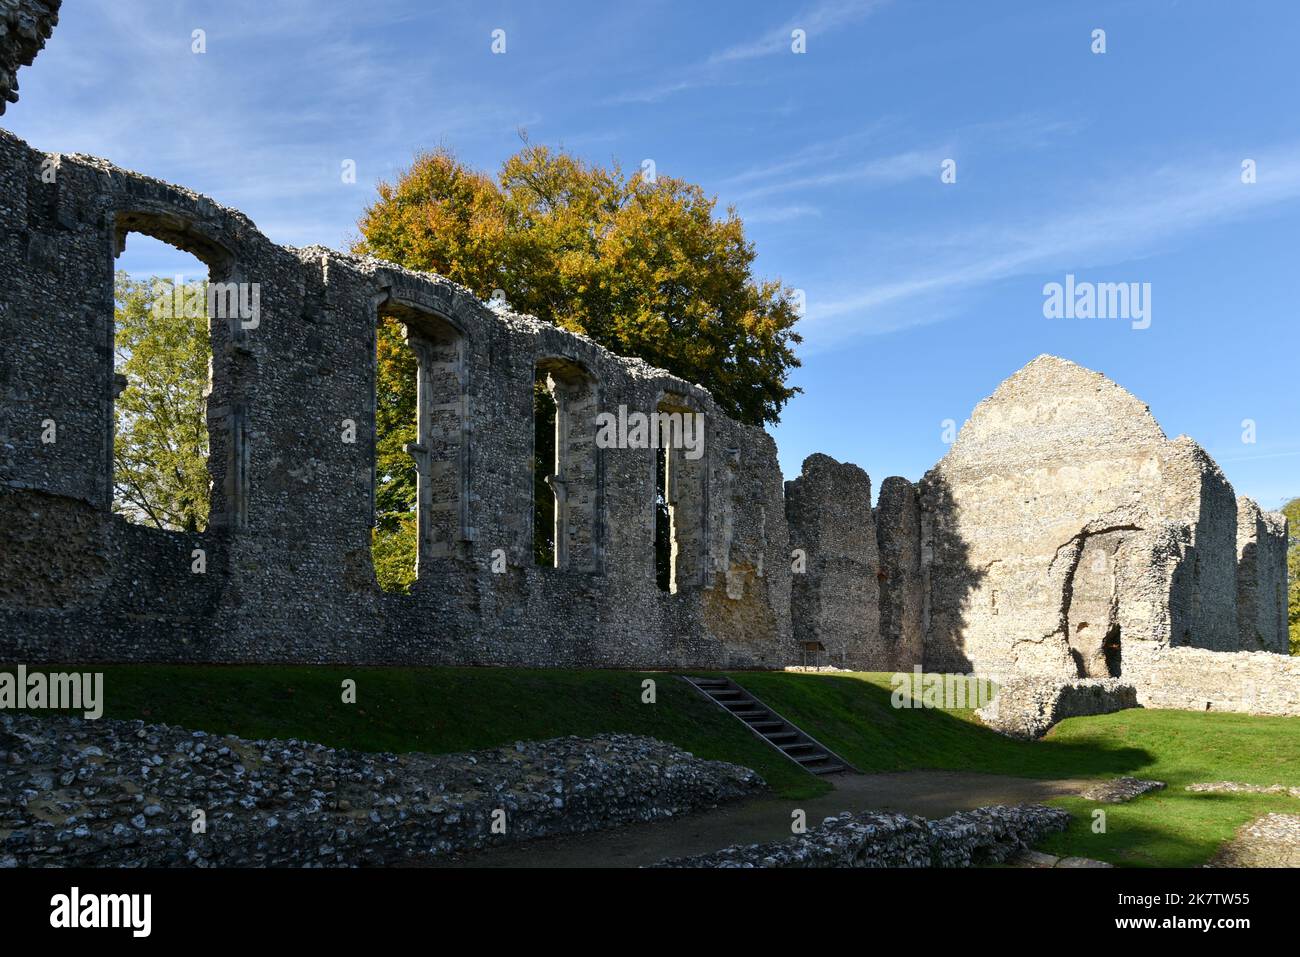 The ruins of Bishop's Waltham palace in Hampshire, England. Stock Photo